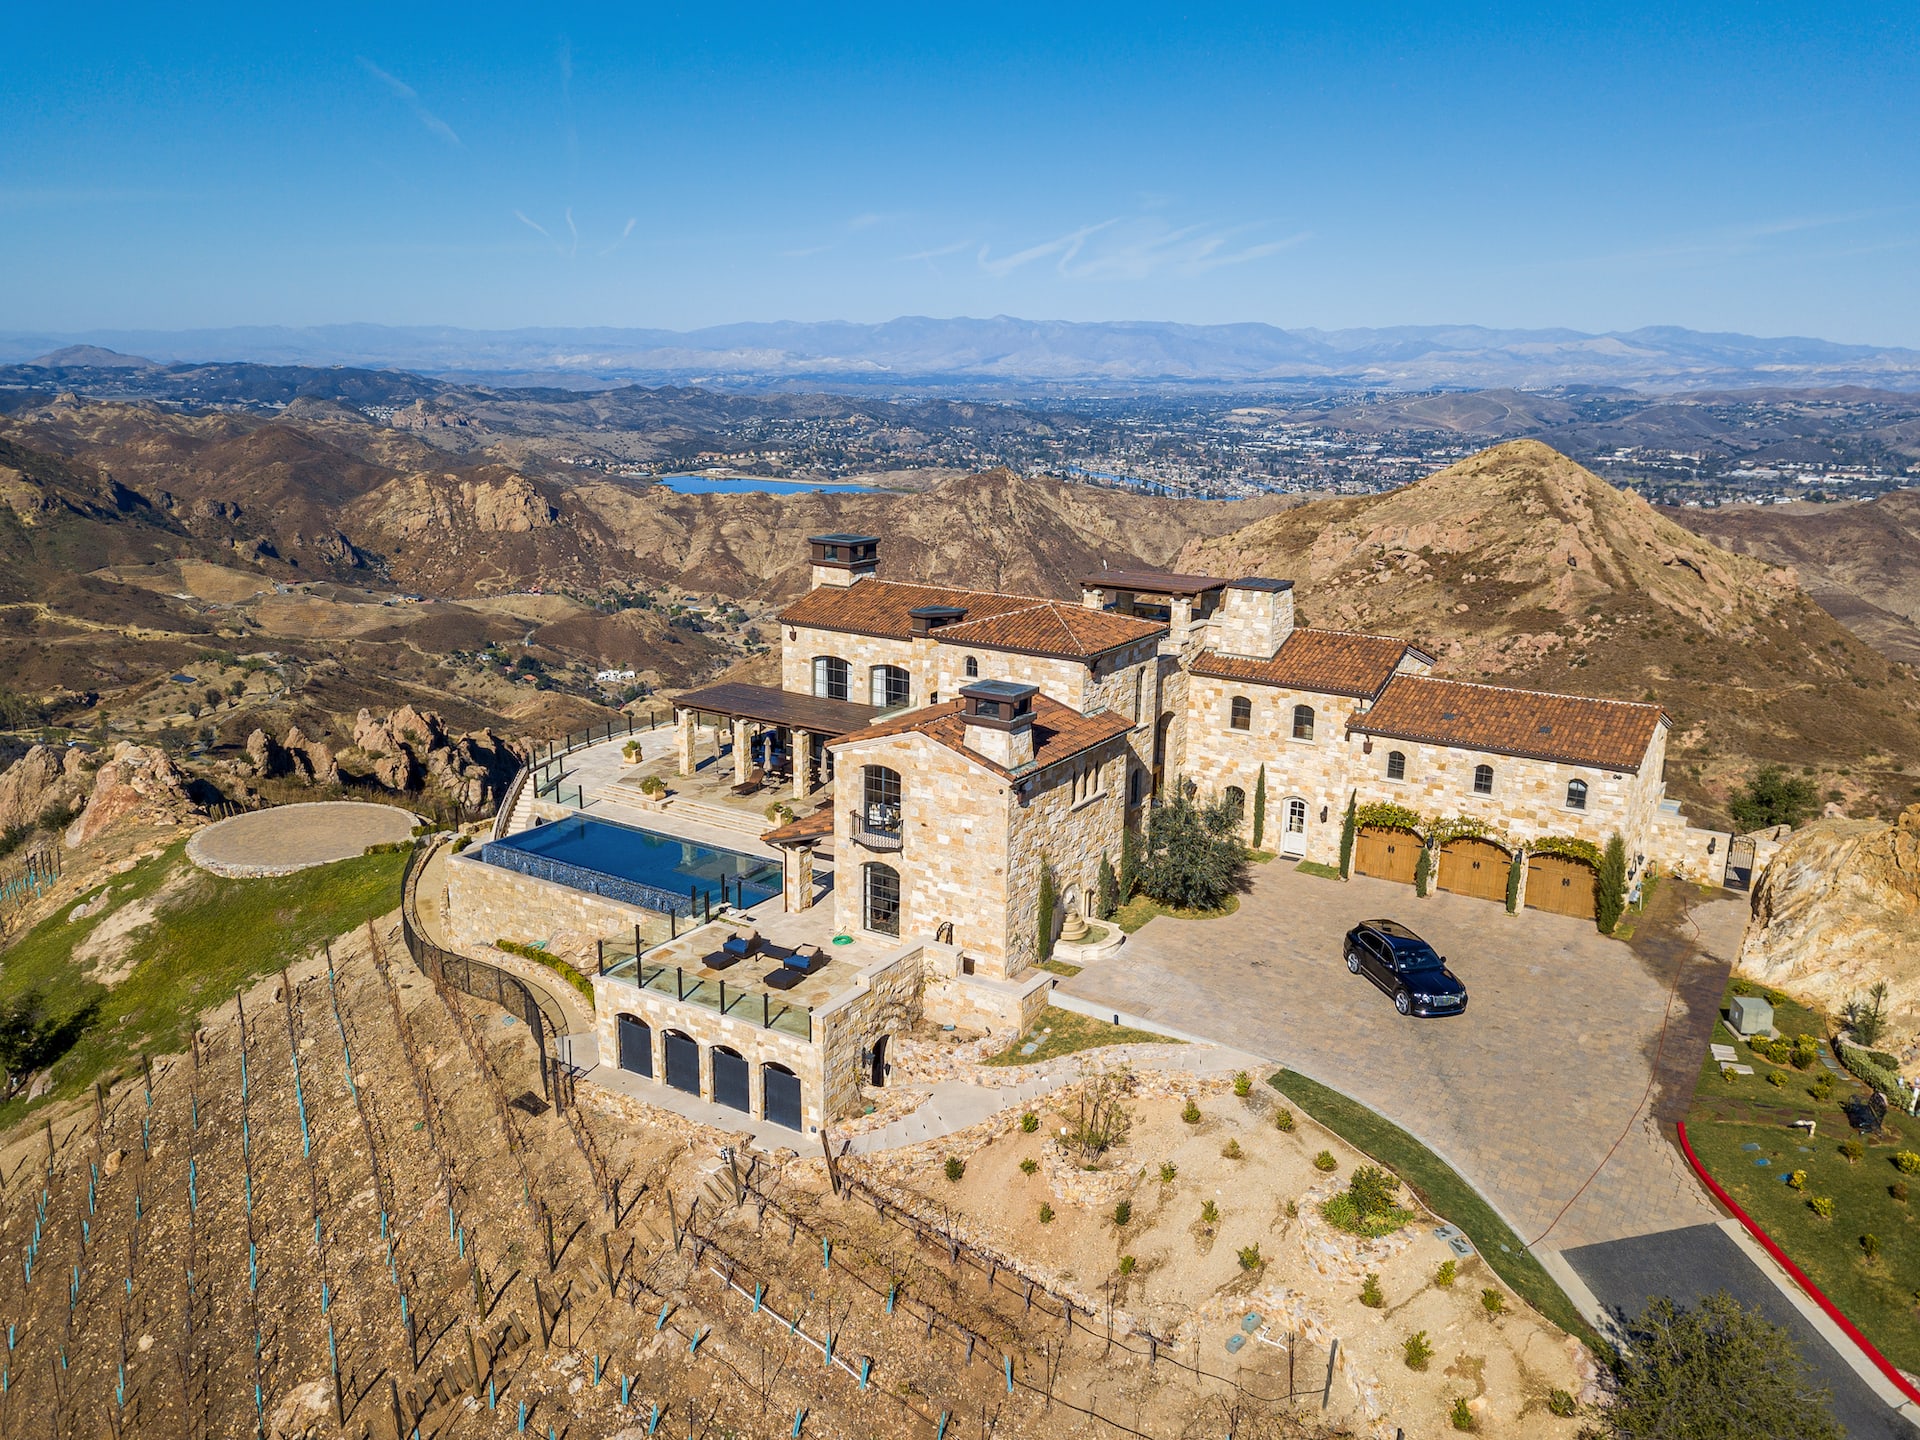 This estate is nestled on the top of the scenic Santa Monica Mountains surrounded by lush vineyards and gardens.